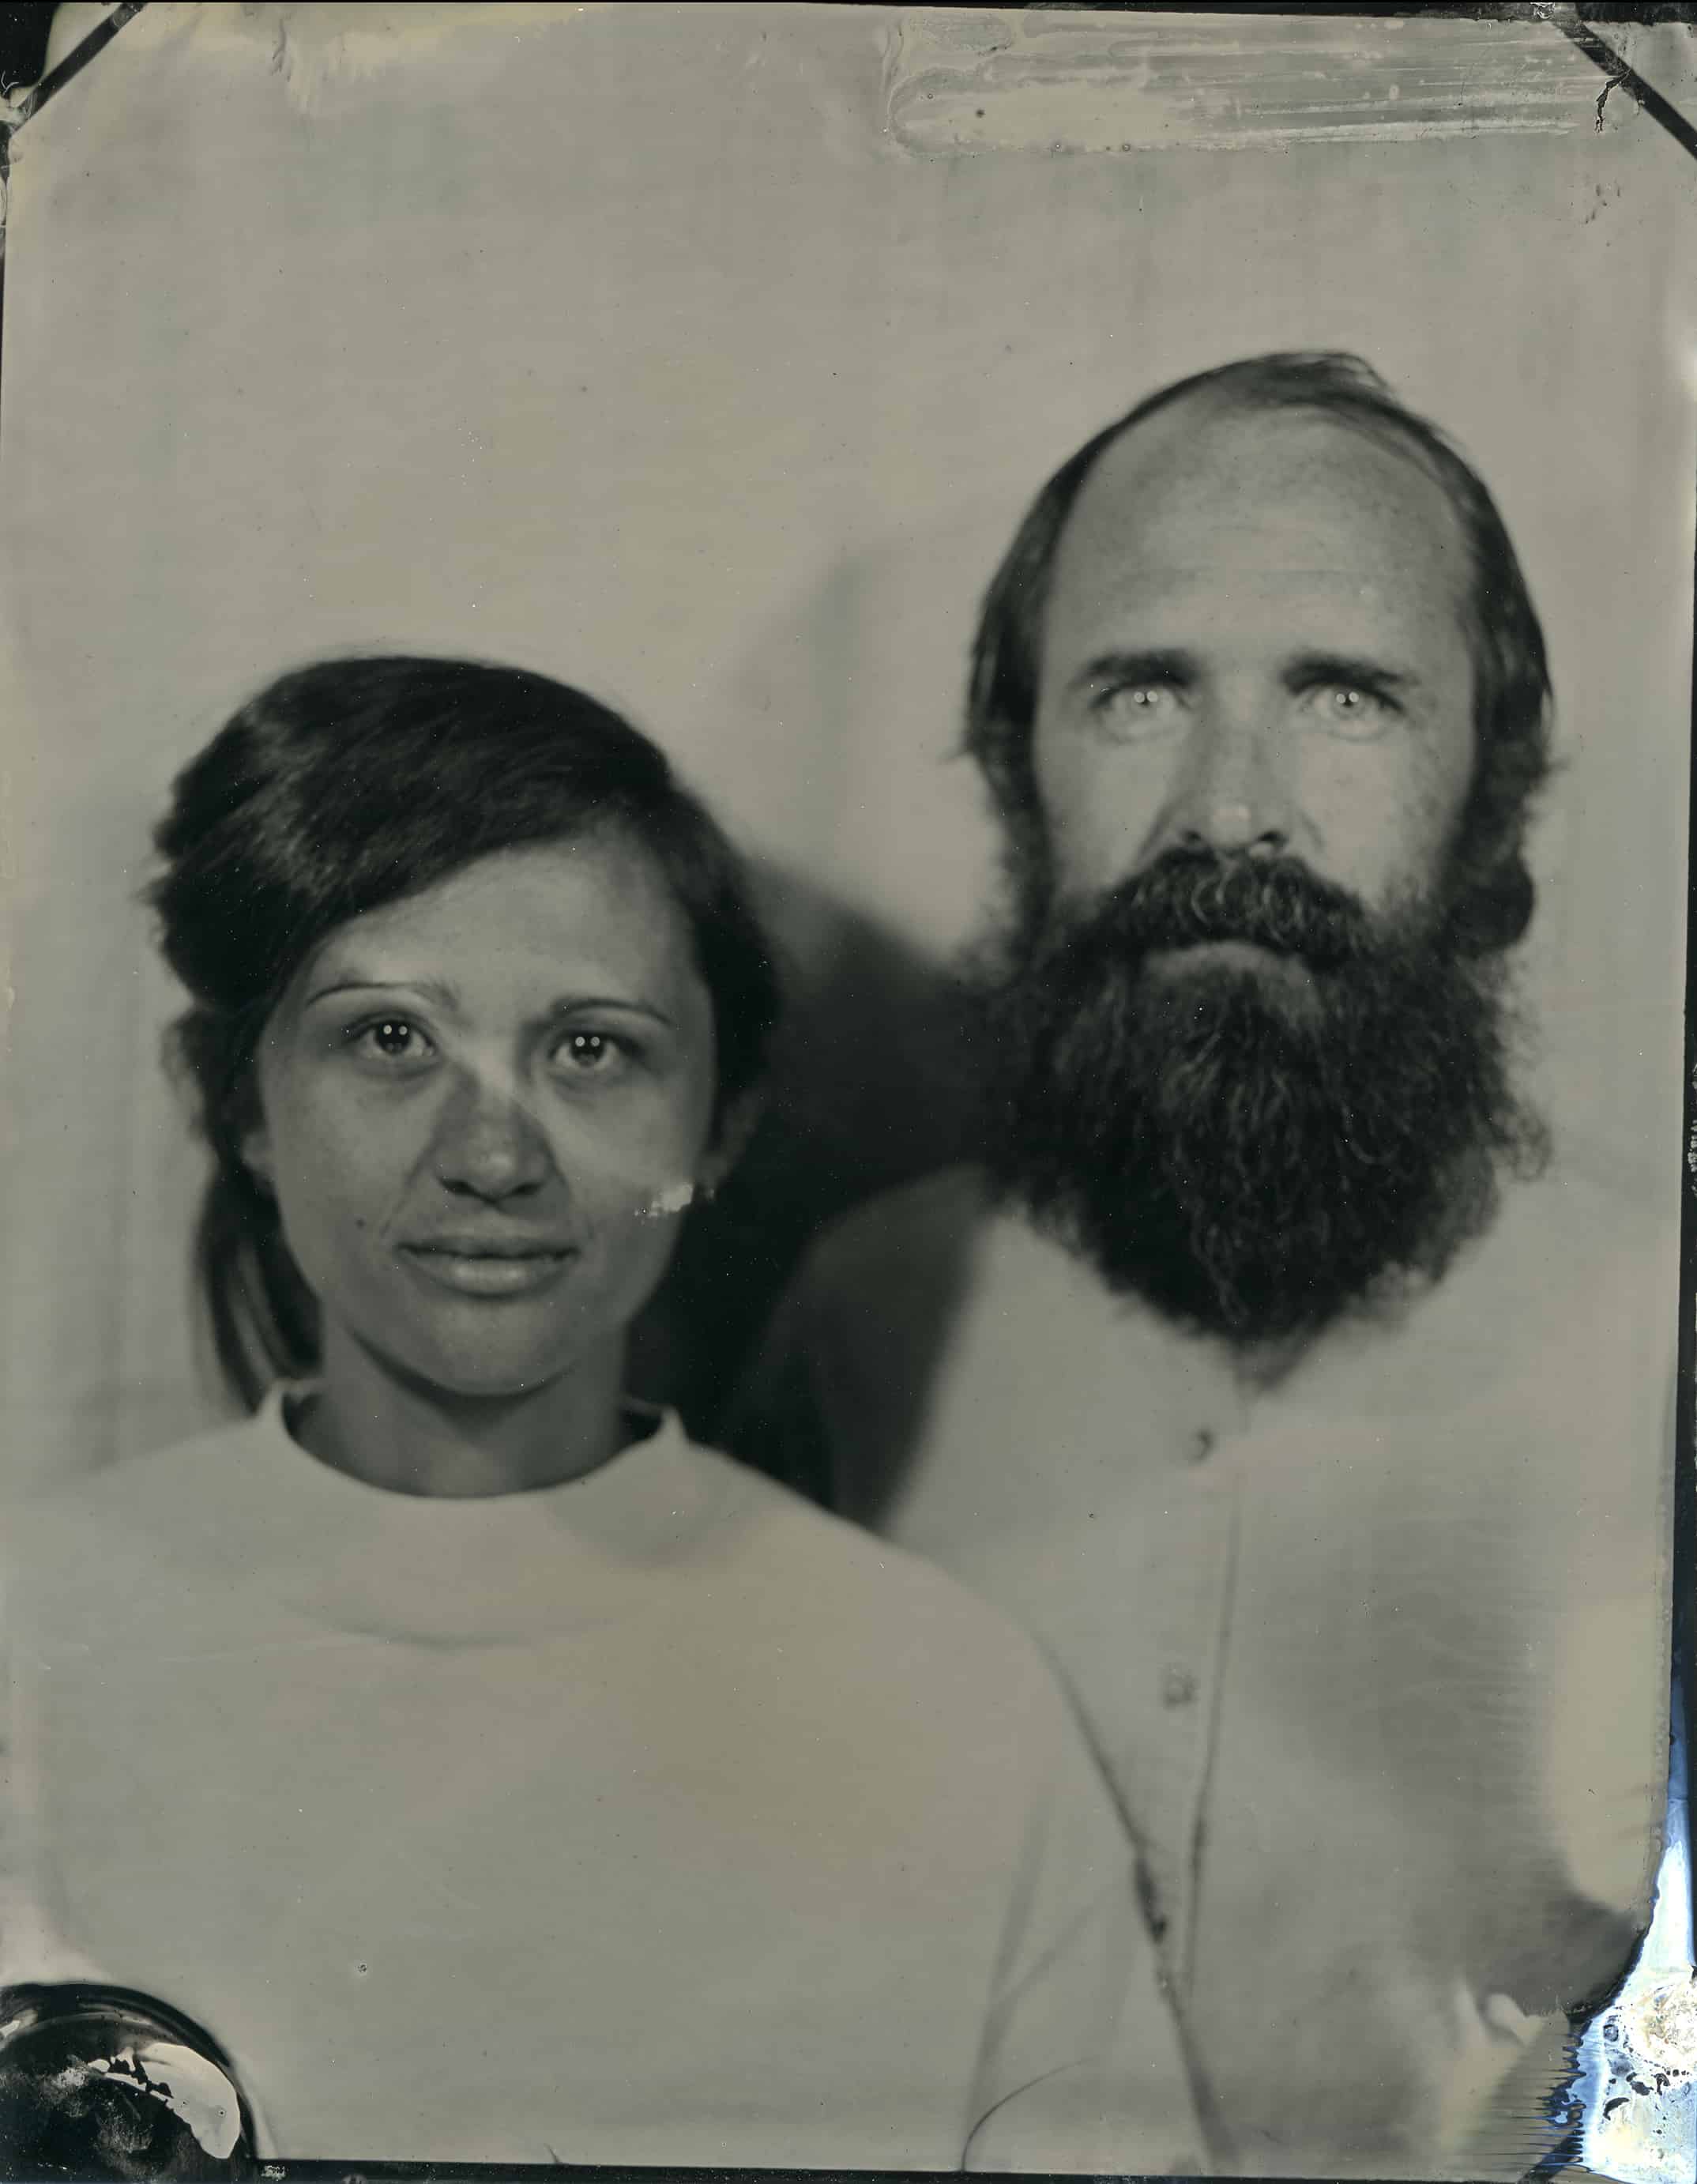 Tintype Portrait created in Athens, Georgia by Kate Lamb of Wild in Love Photo